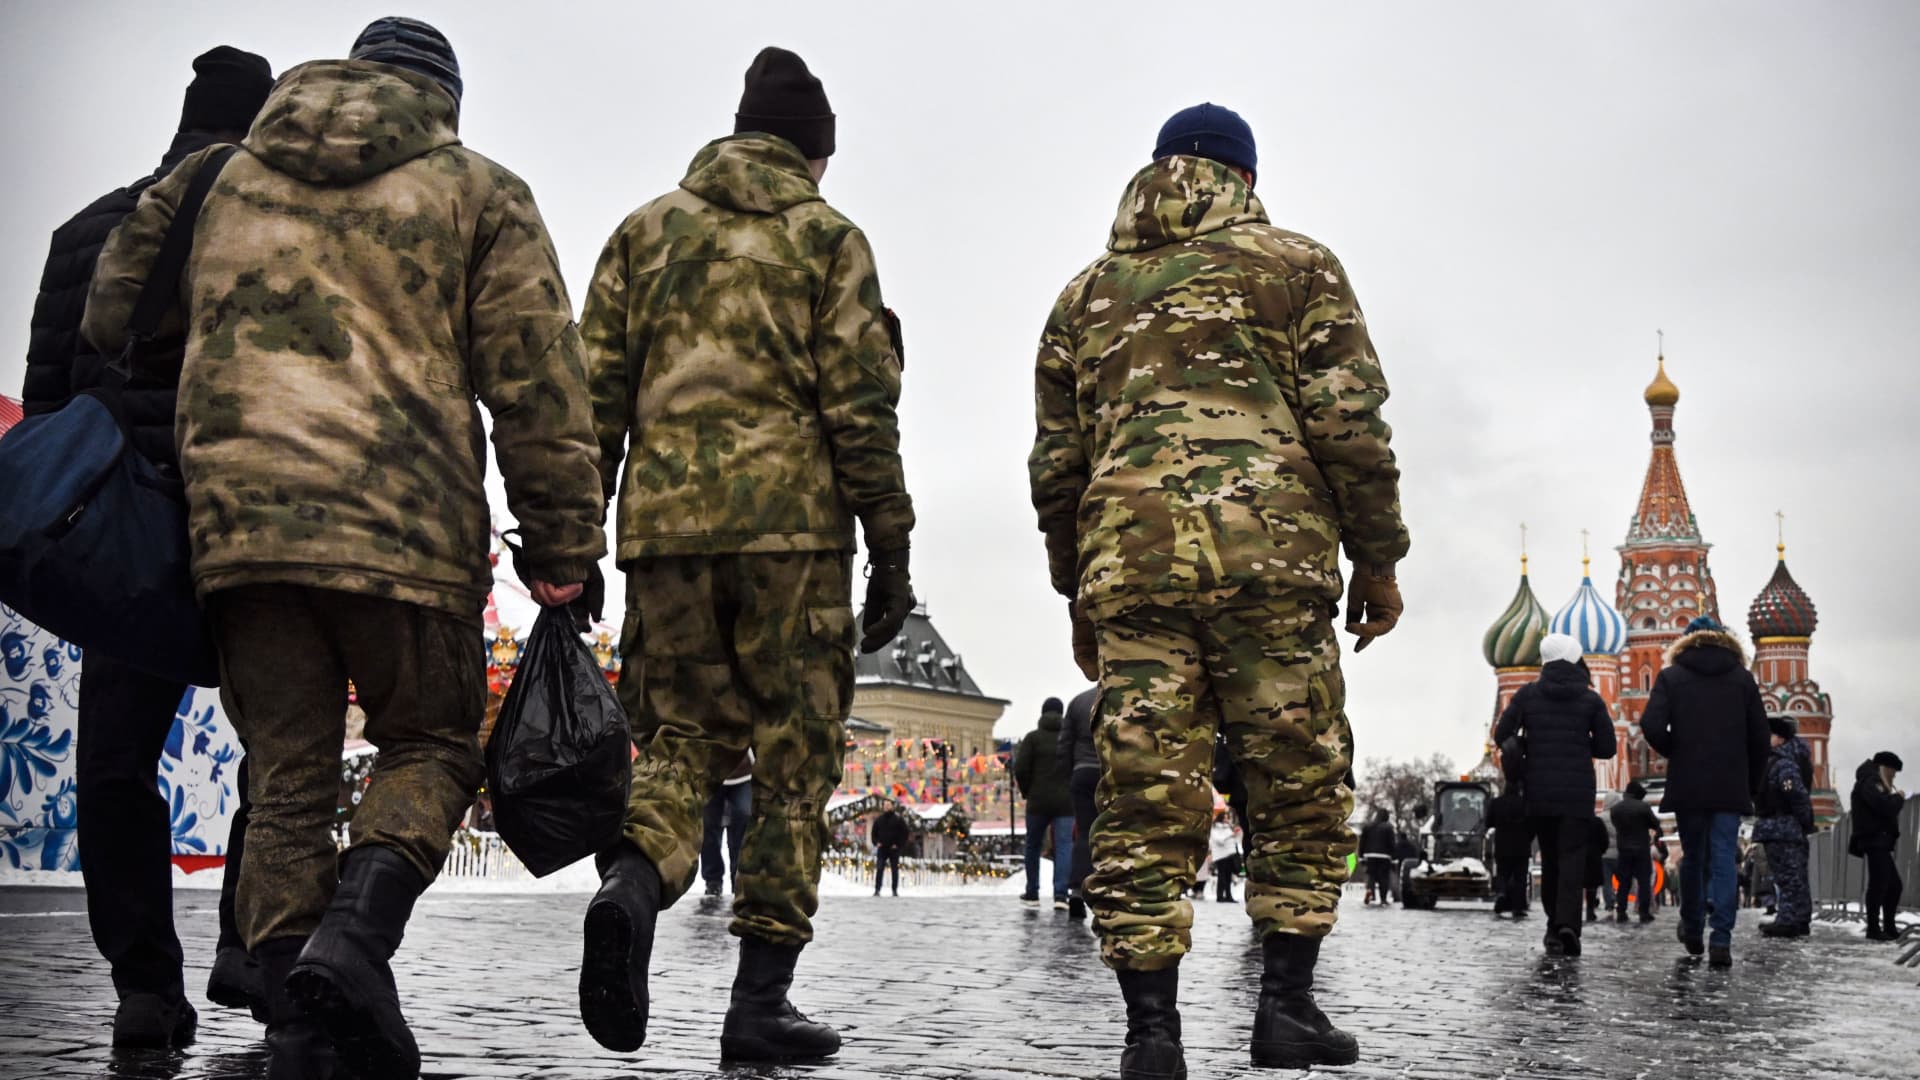 Men wearing military uniform walk along Red Square in front of St. Basil's Cathedral in central Moscow on February 13, 2023.